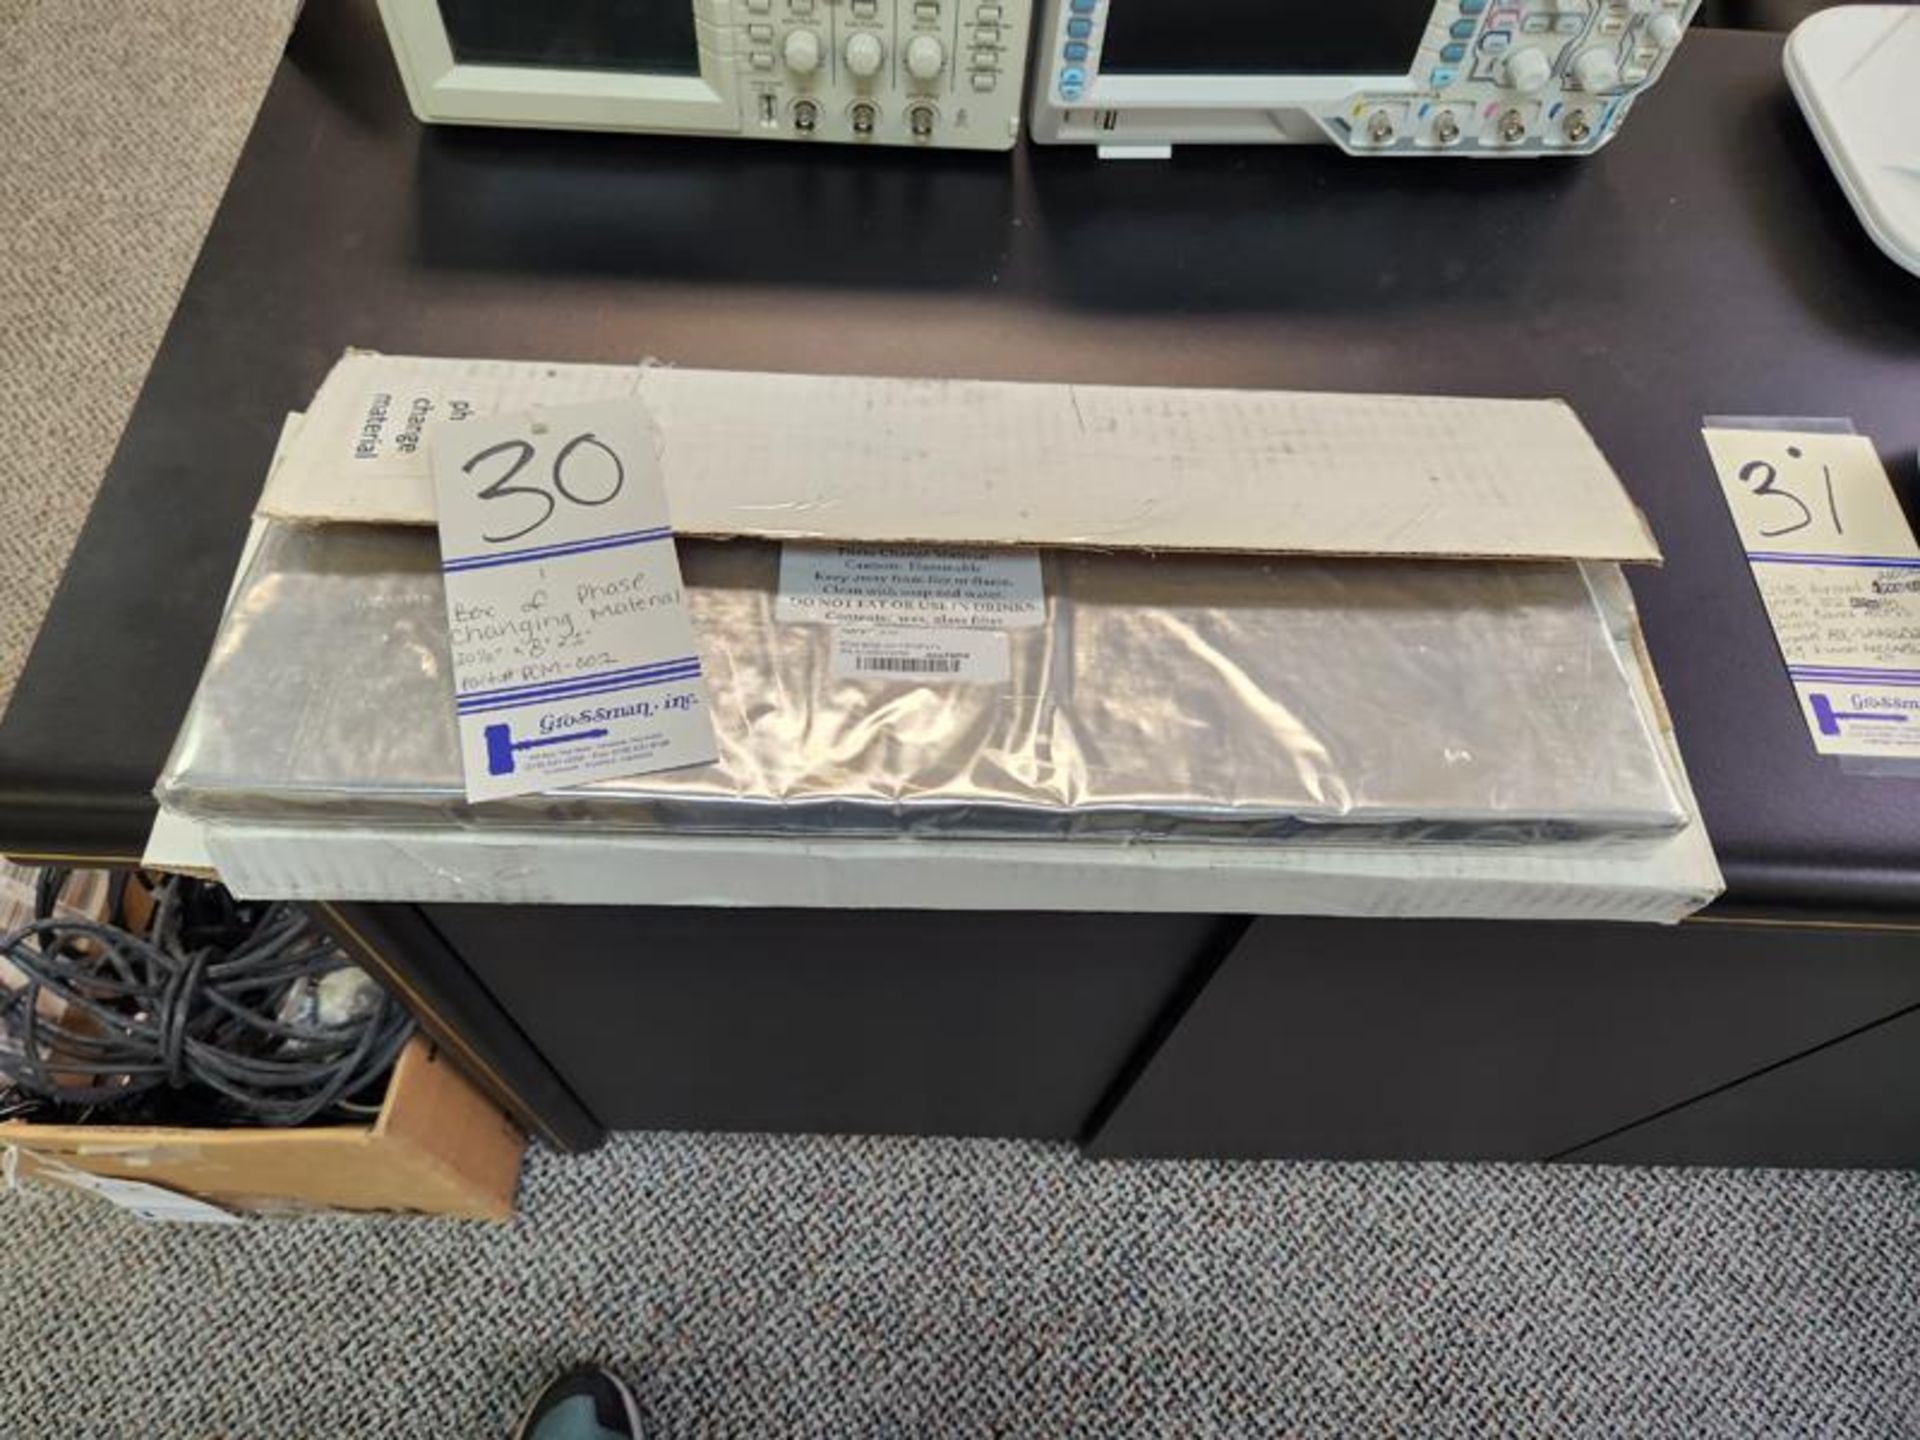 BOX OF PHASE CHANGING MATERIAL 20-1/8" X 8" X 1" - PART # PCM-001